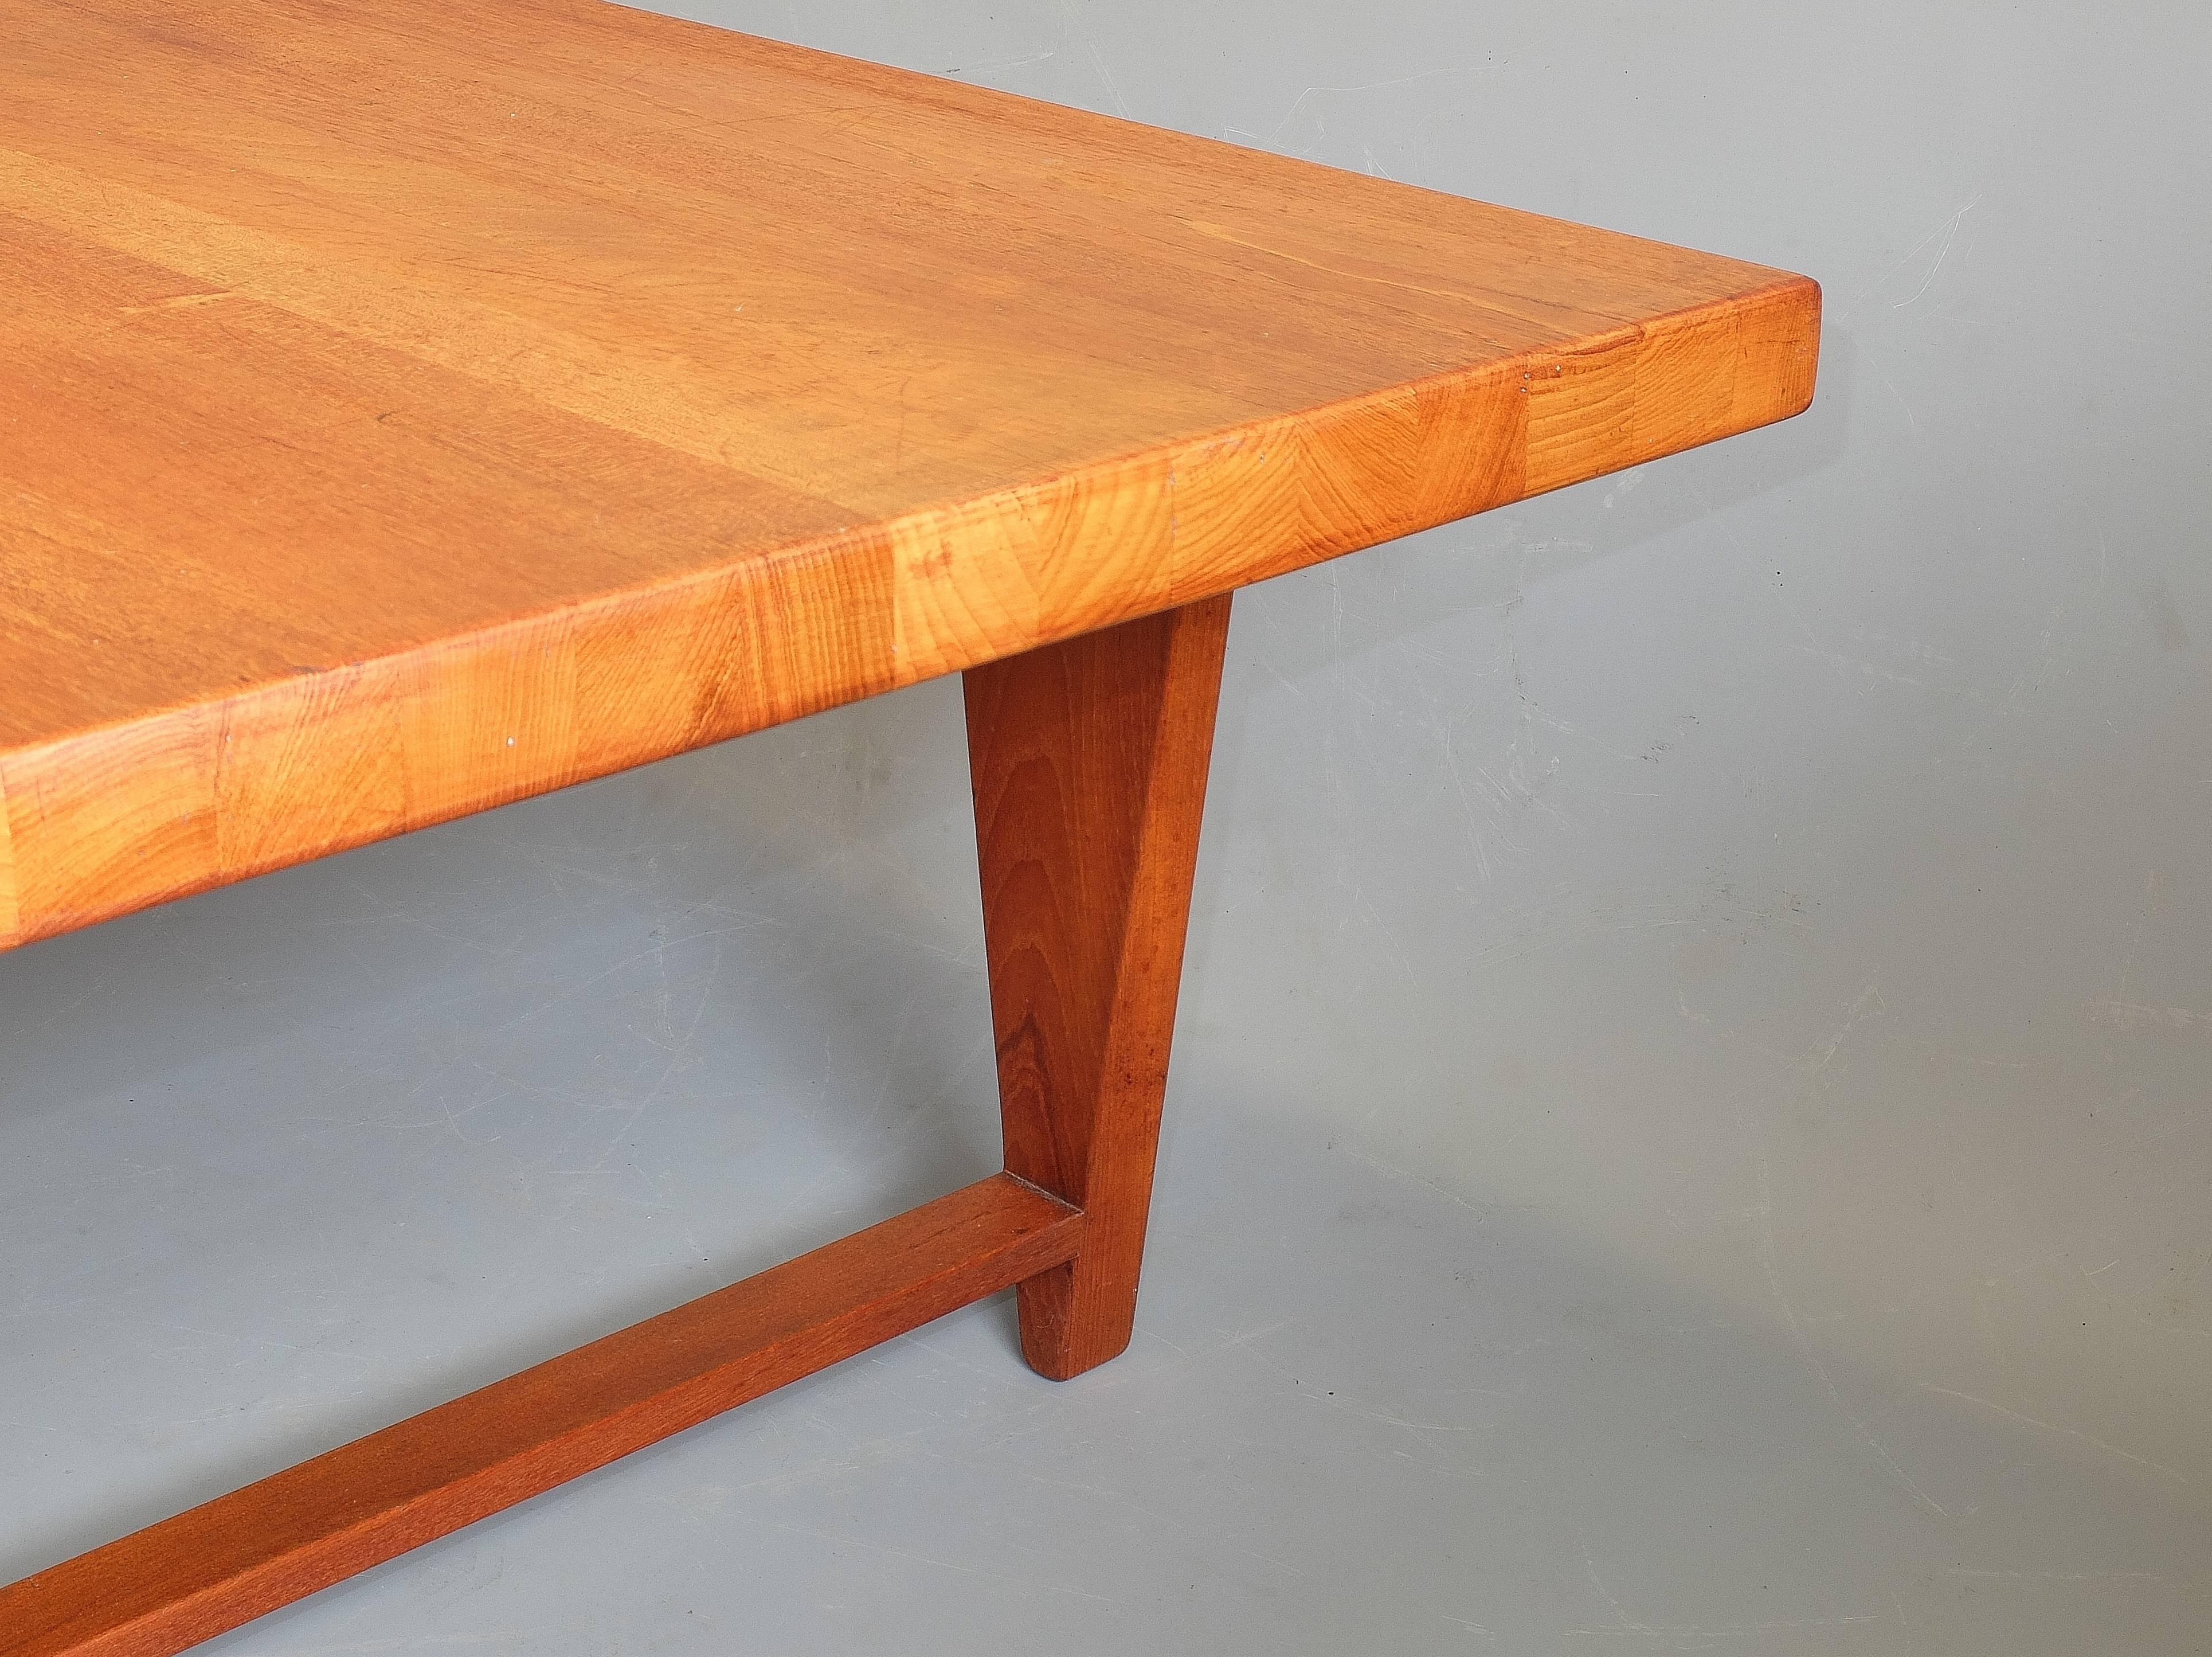 Illum Wikkelso Coffee Table Architectural Solid Teak 1960s Danish For Sale 1